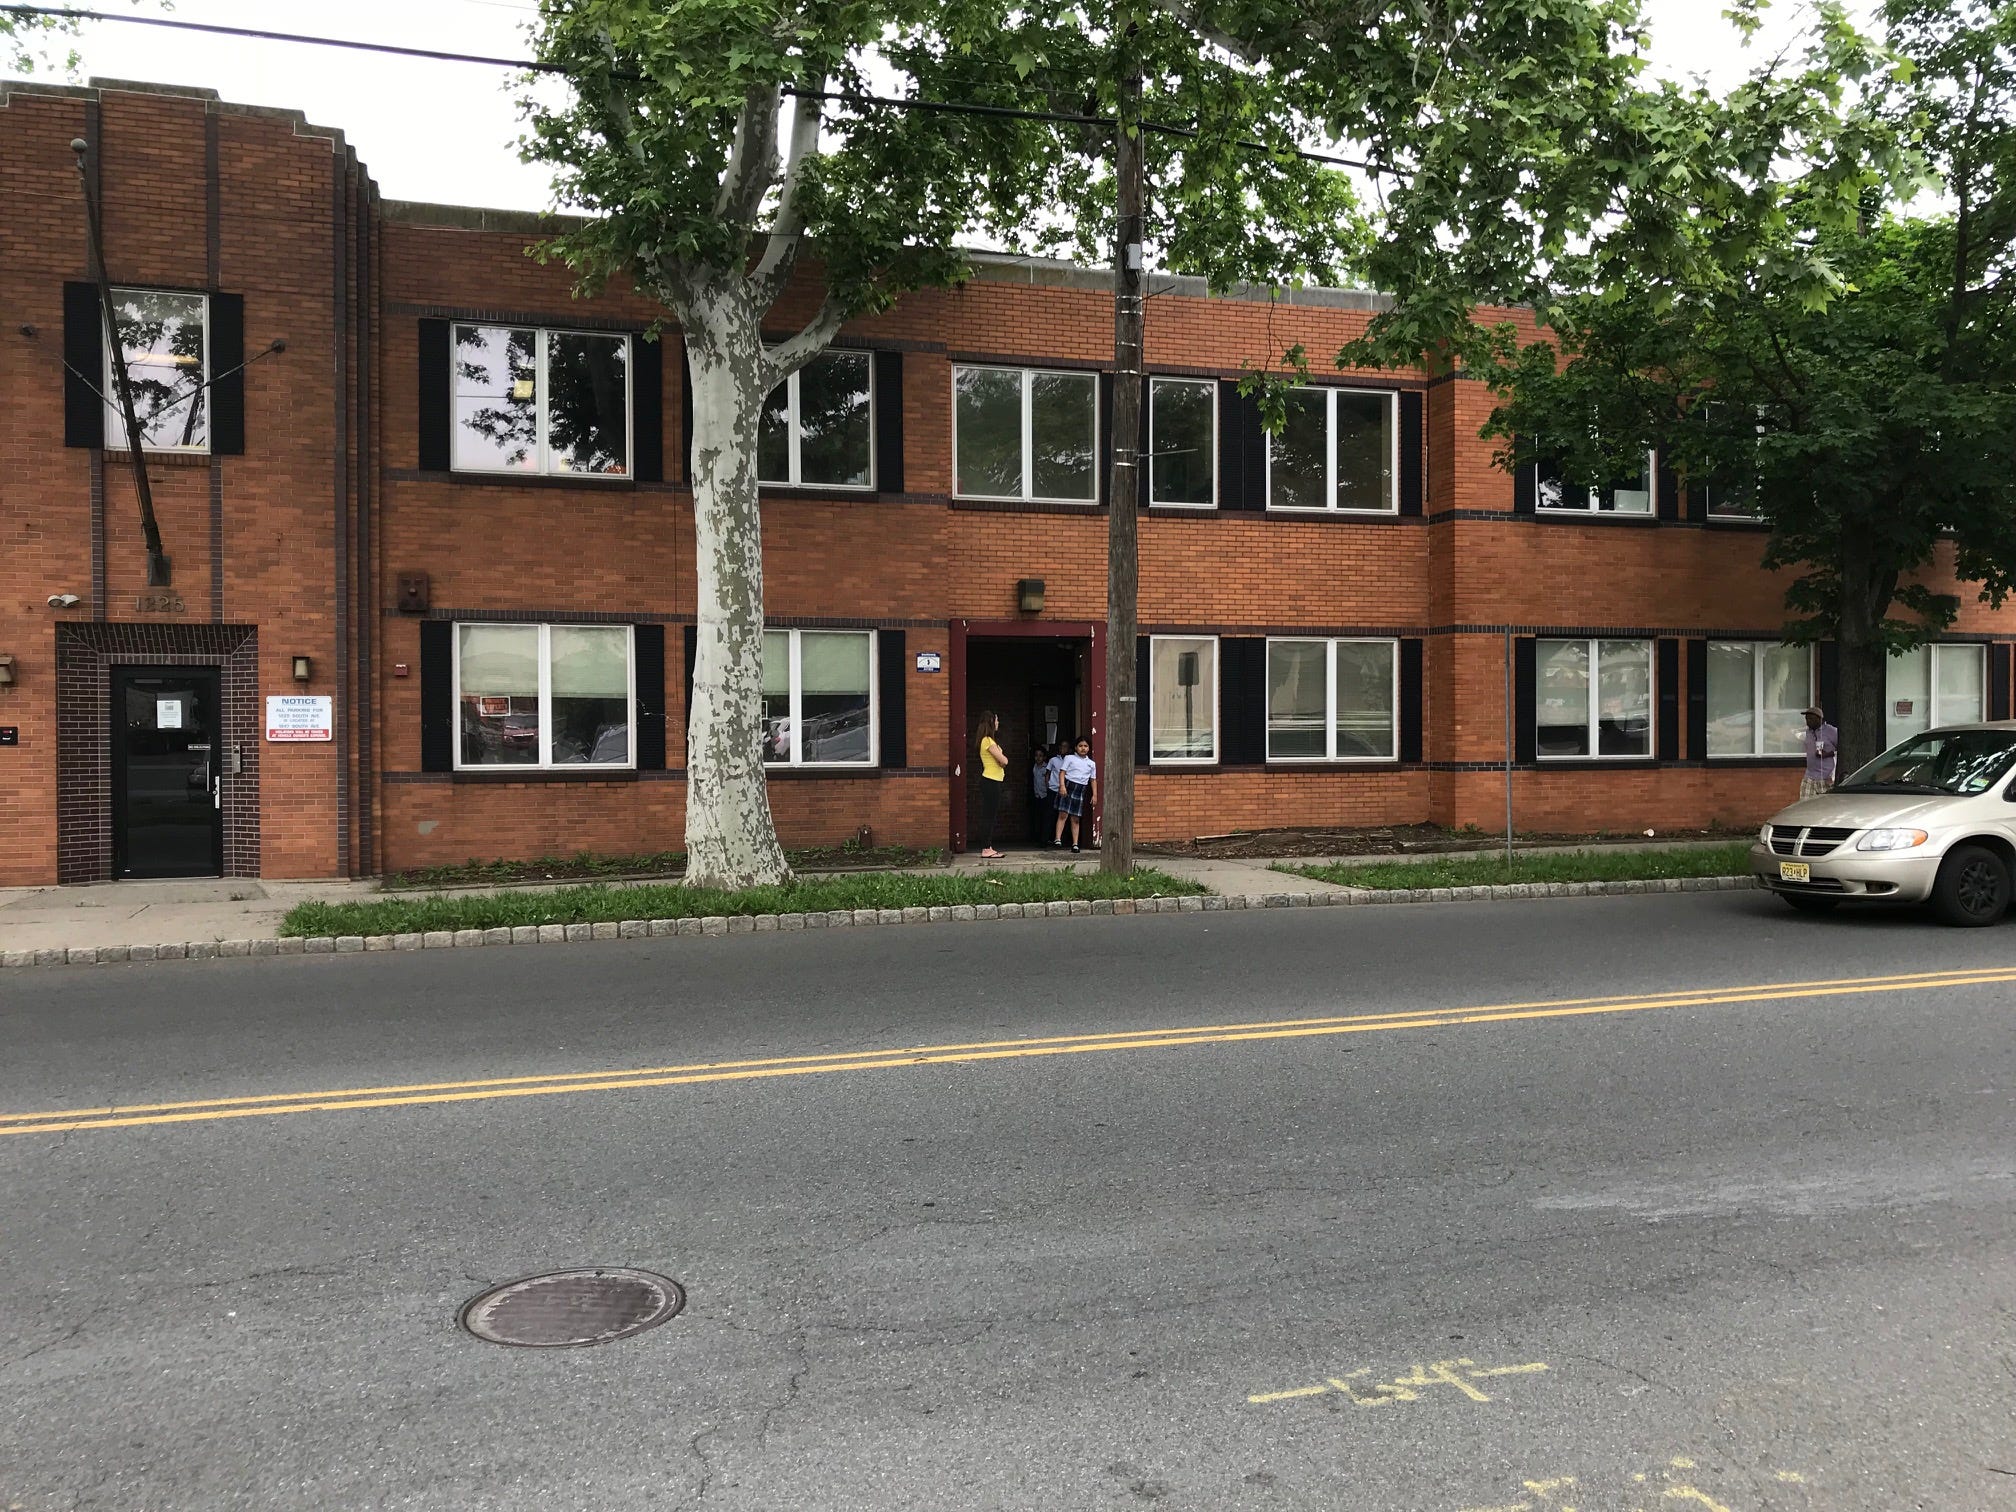 When Jersey Central Arts in Plainfield closed, the private company that owned it had no more taxpayer income and defaulted on loans. Another charter school has since rented a portion of the building.